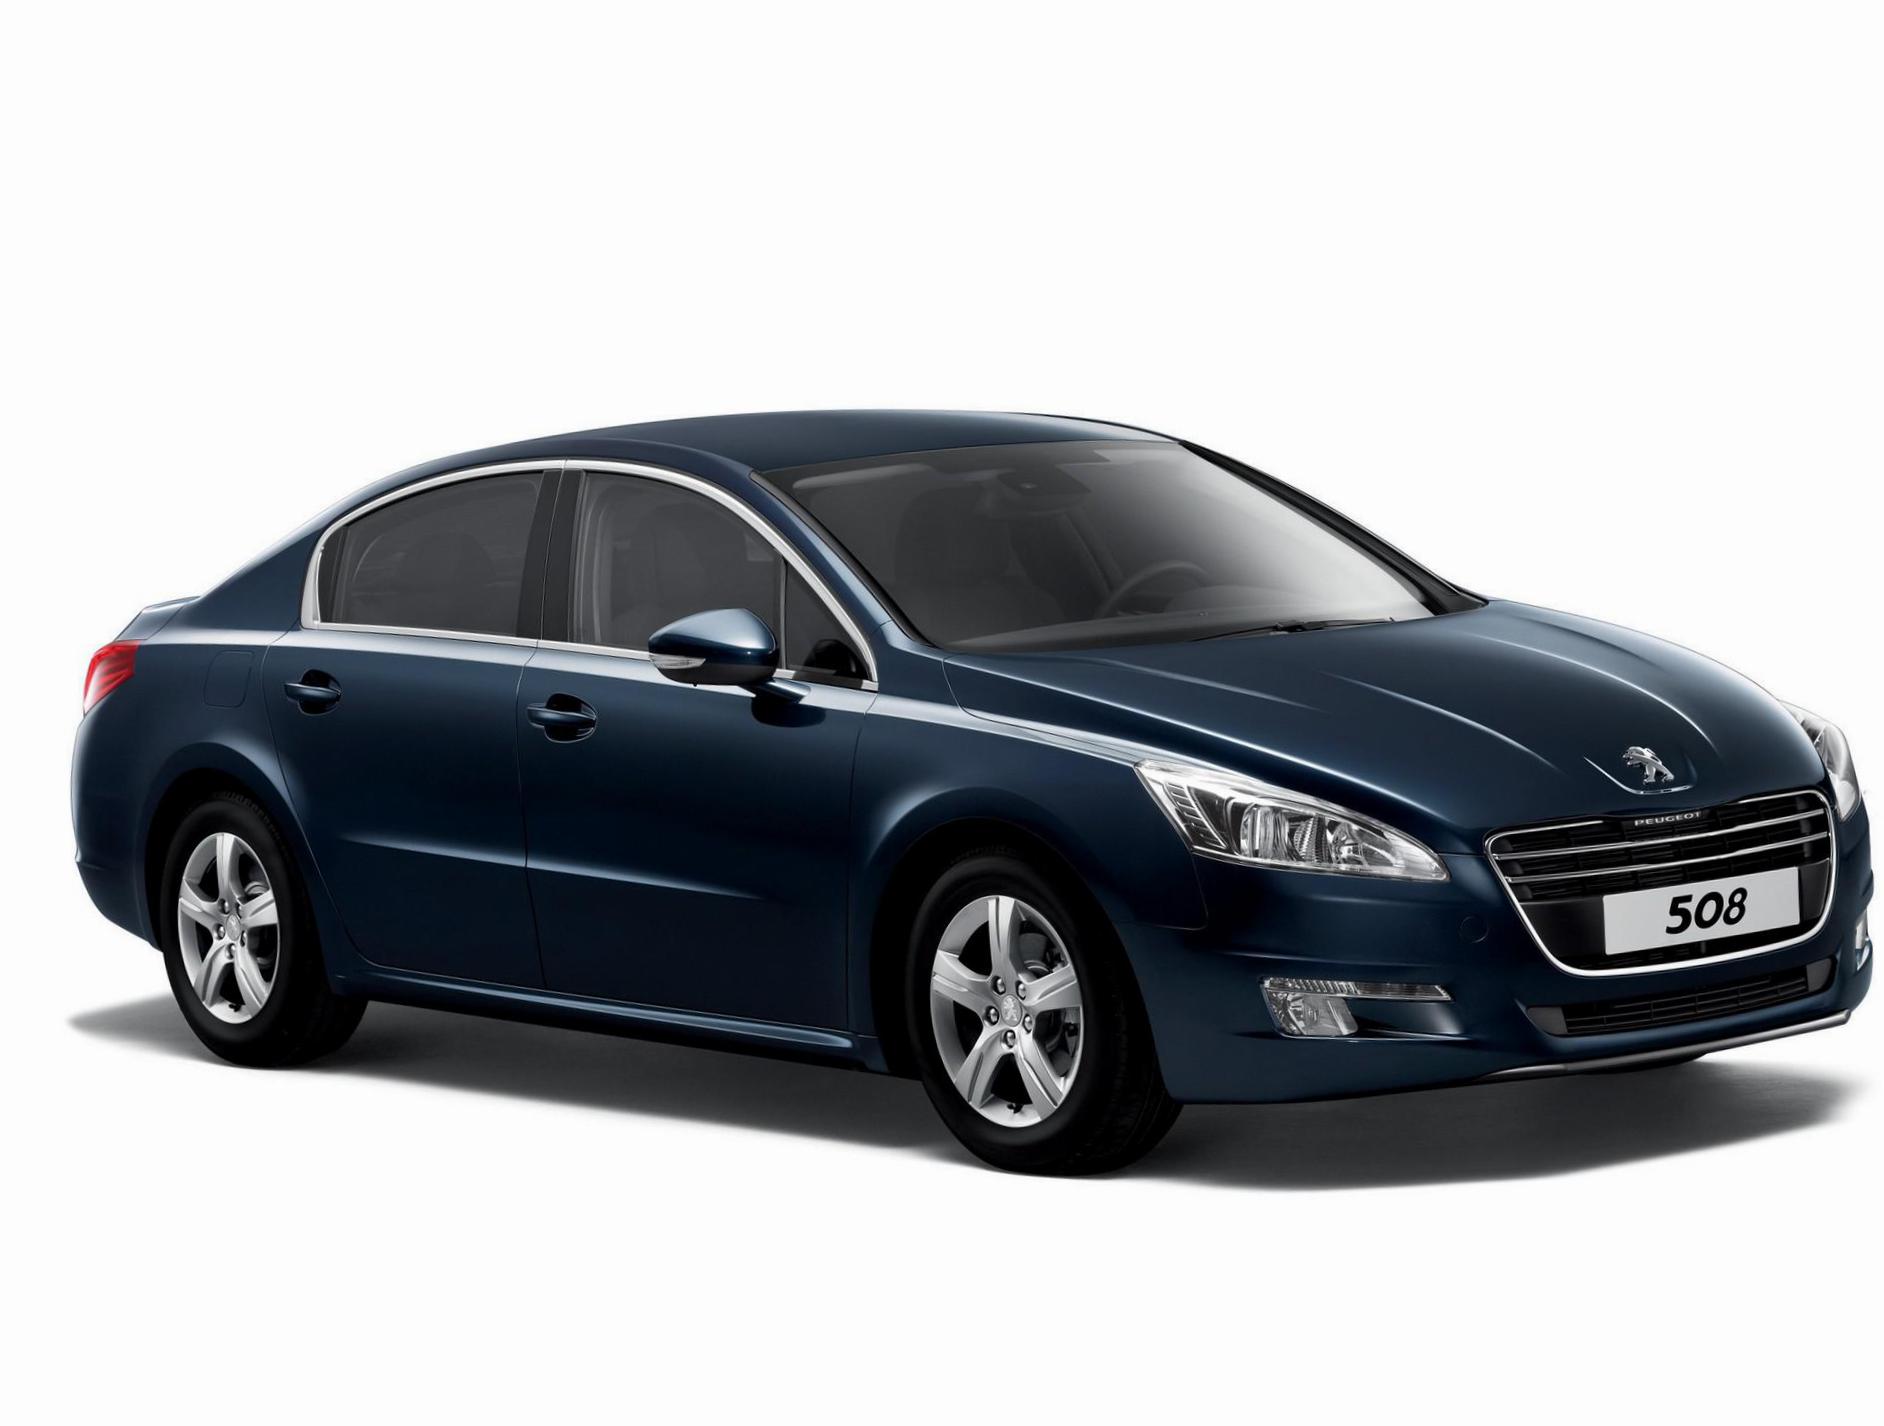 508 Peugeot Specifications 2010